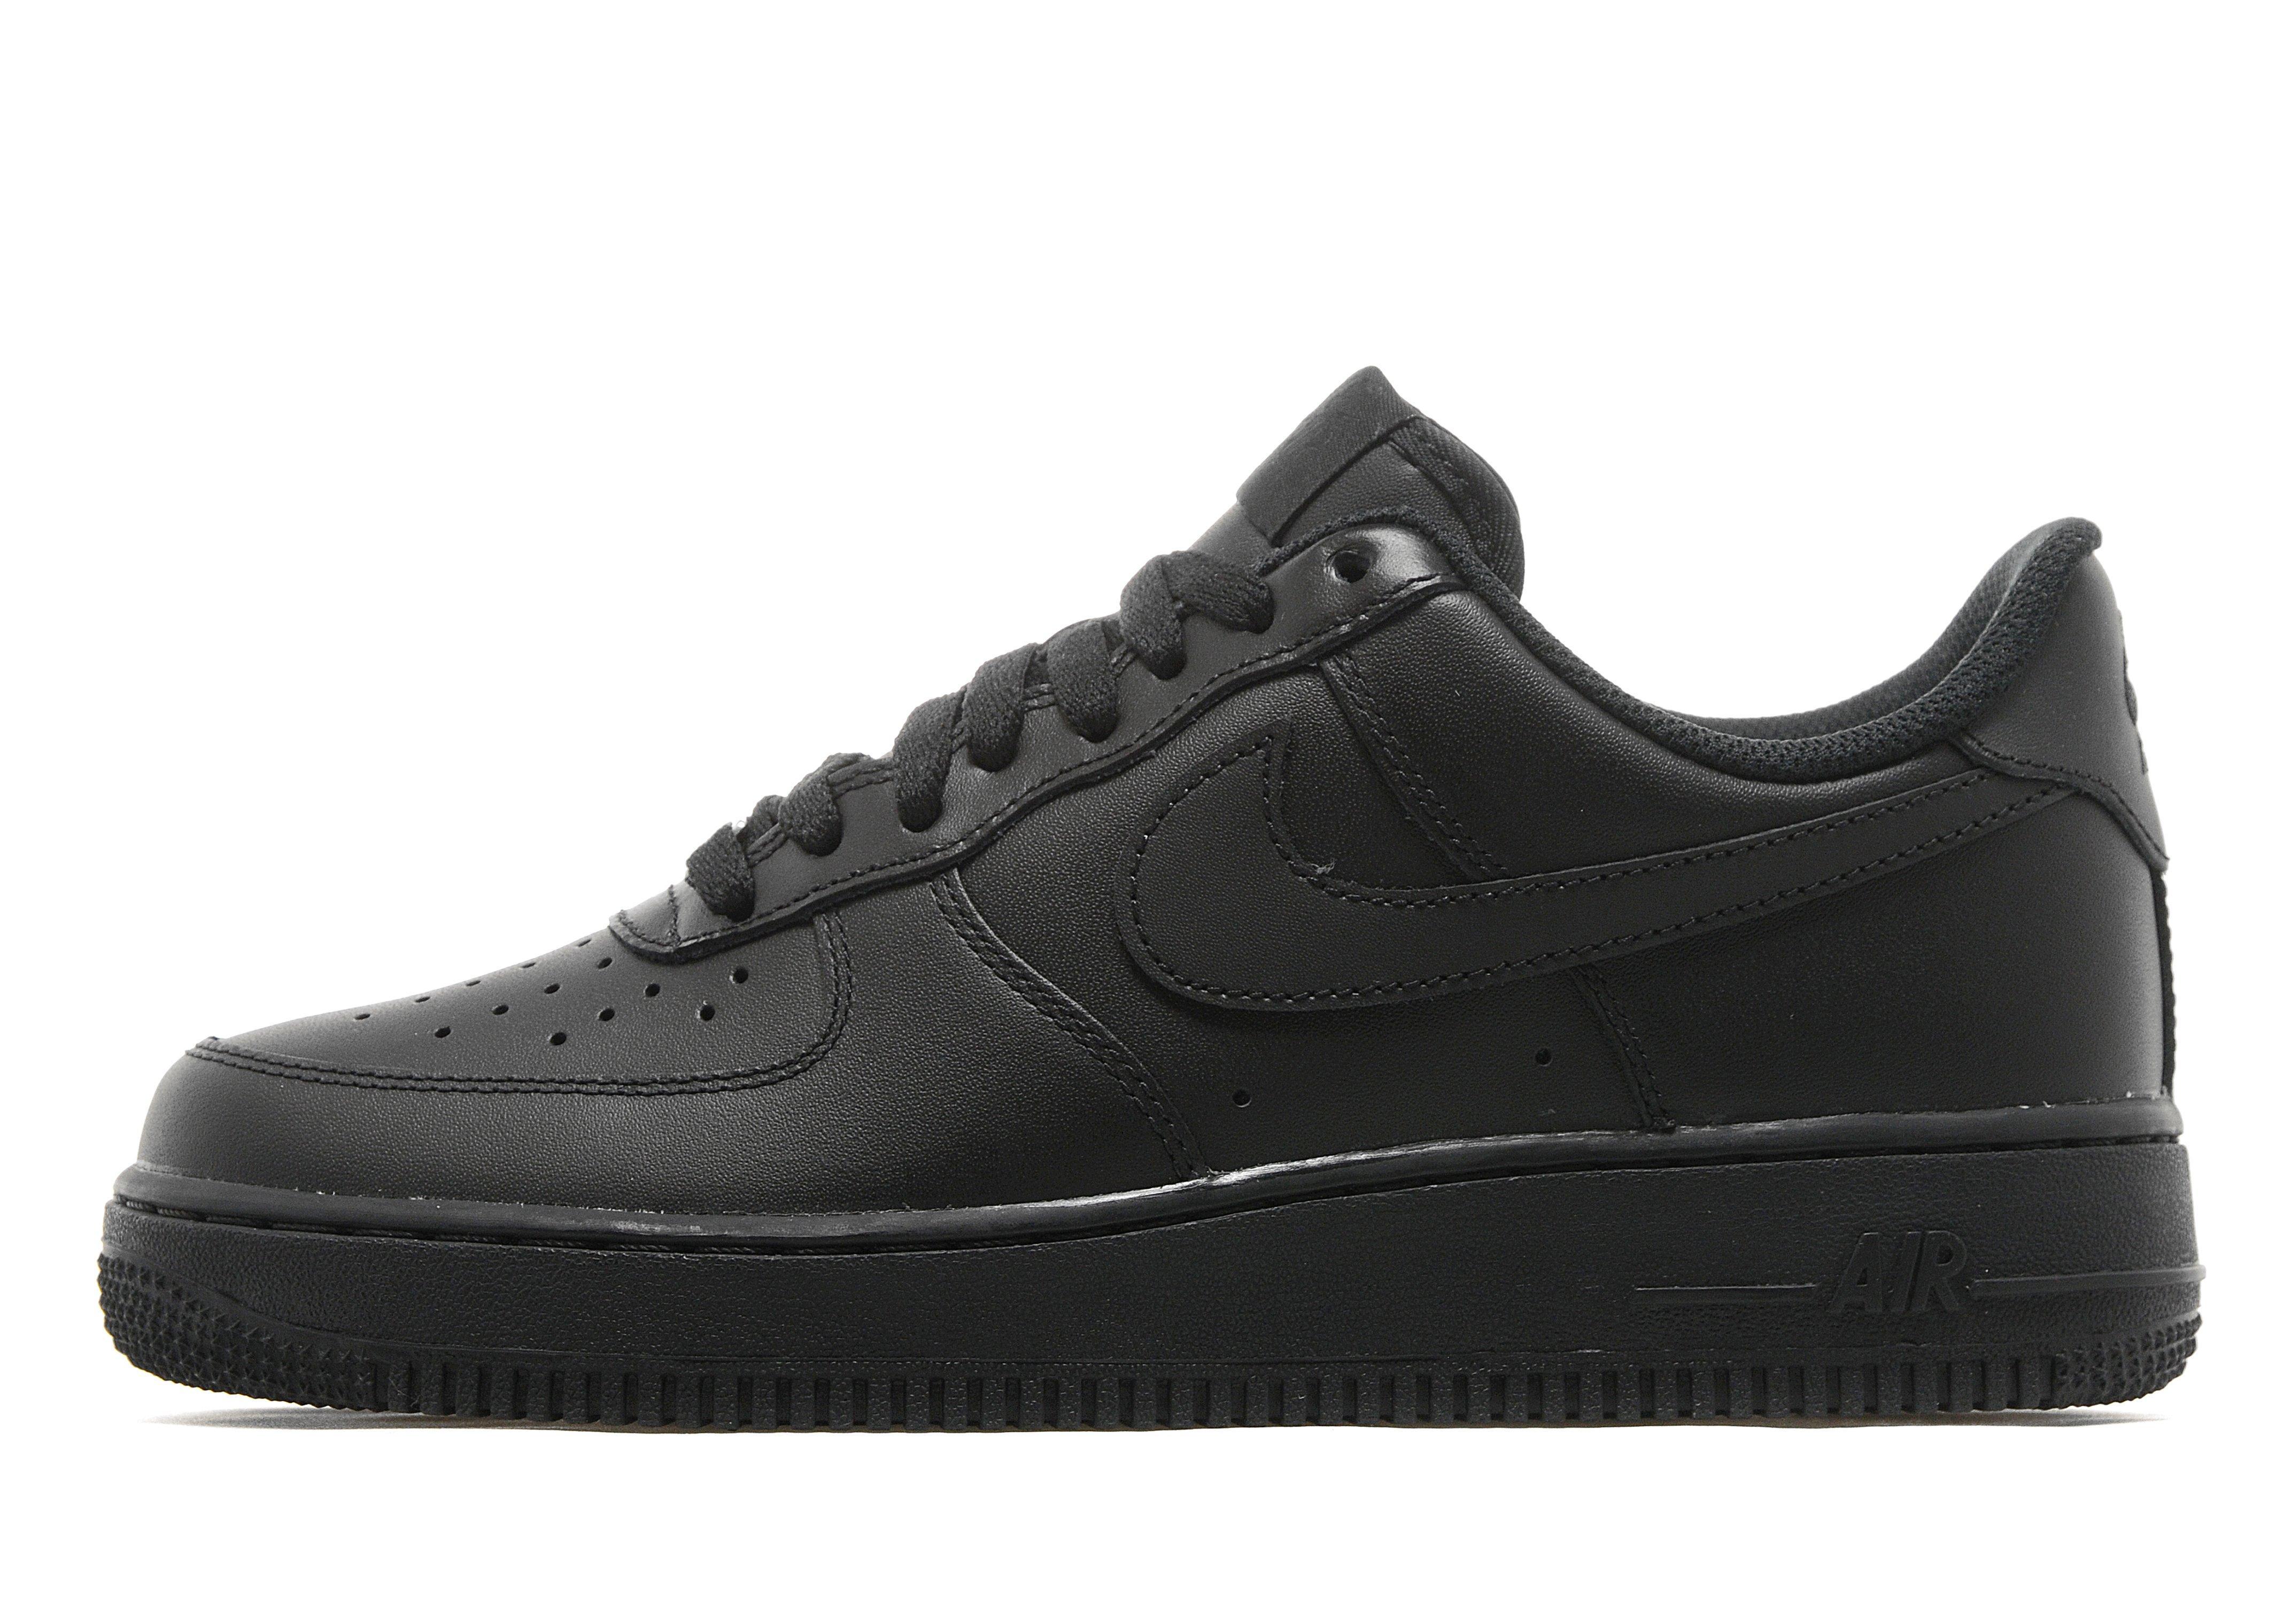 Lyst - Nike Air Force 1 Low in Black for Men - Save 5.825242718446603%